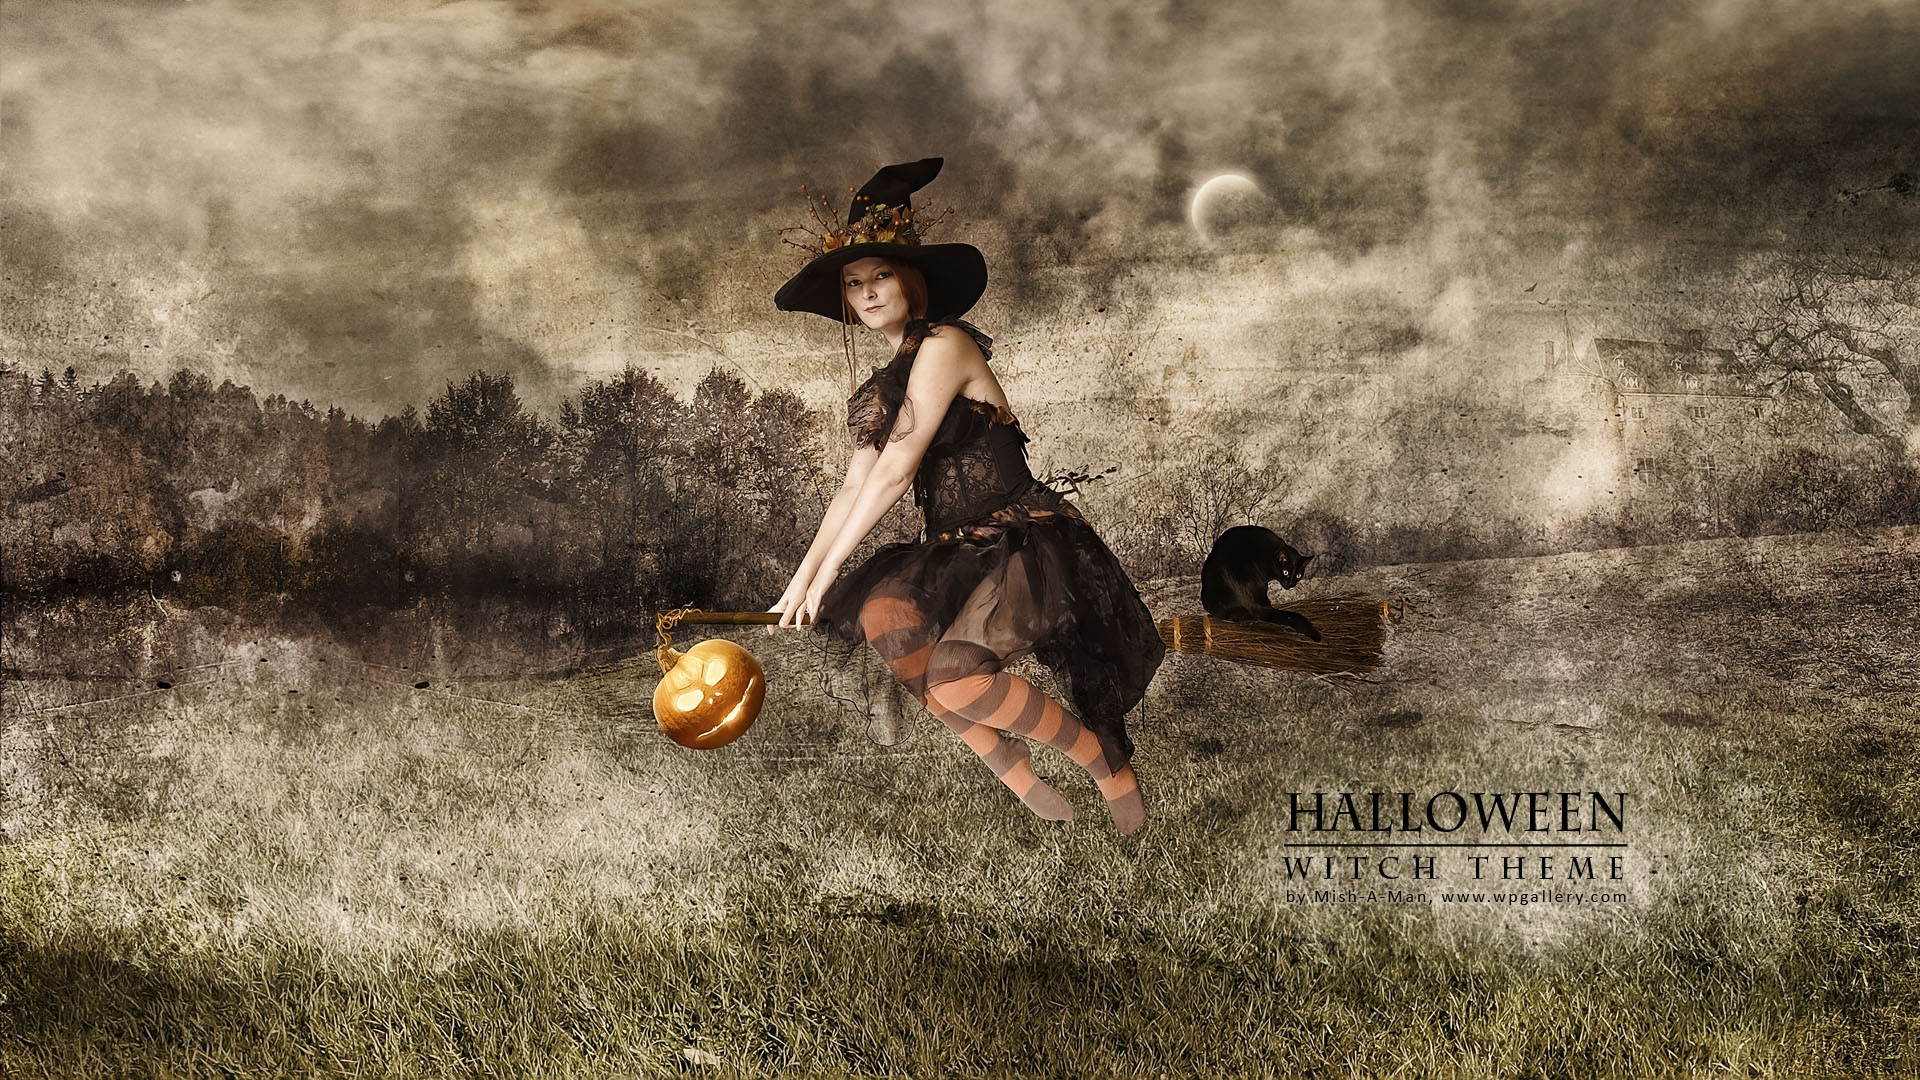 Halloween - Witch theme for 1920 x 1080 HDTV 1080p resolution